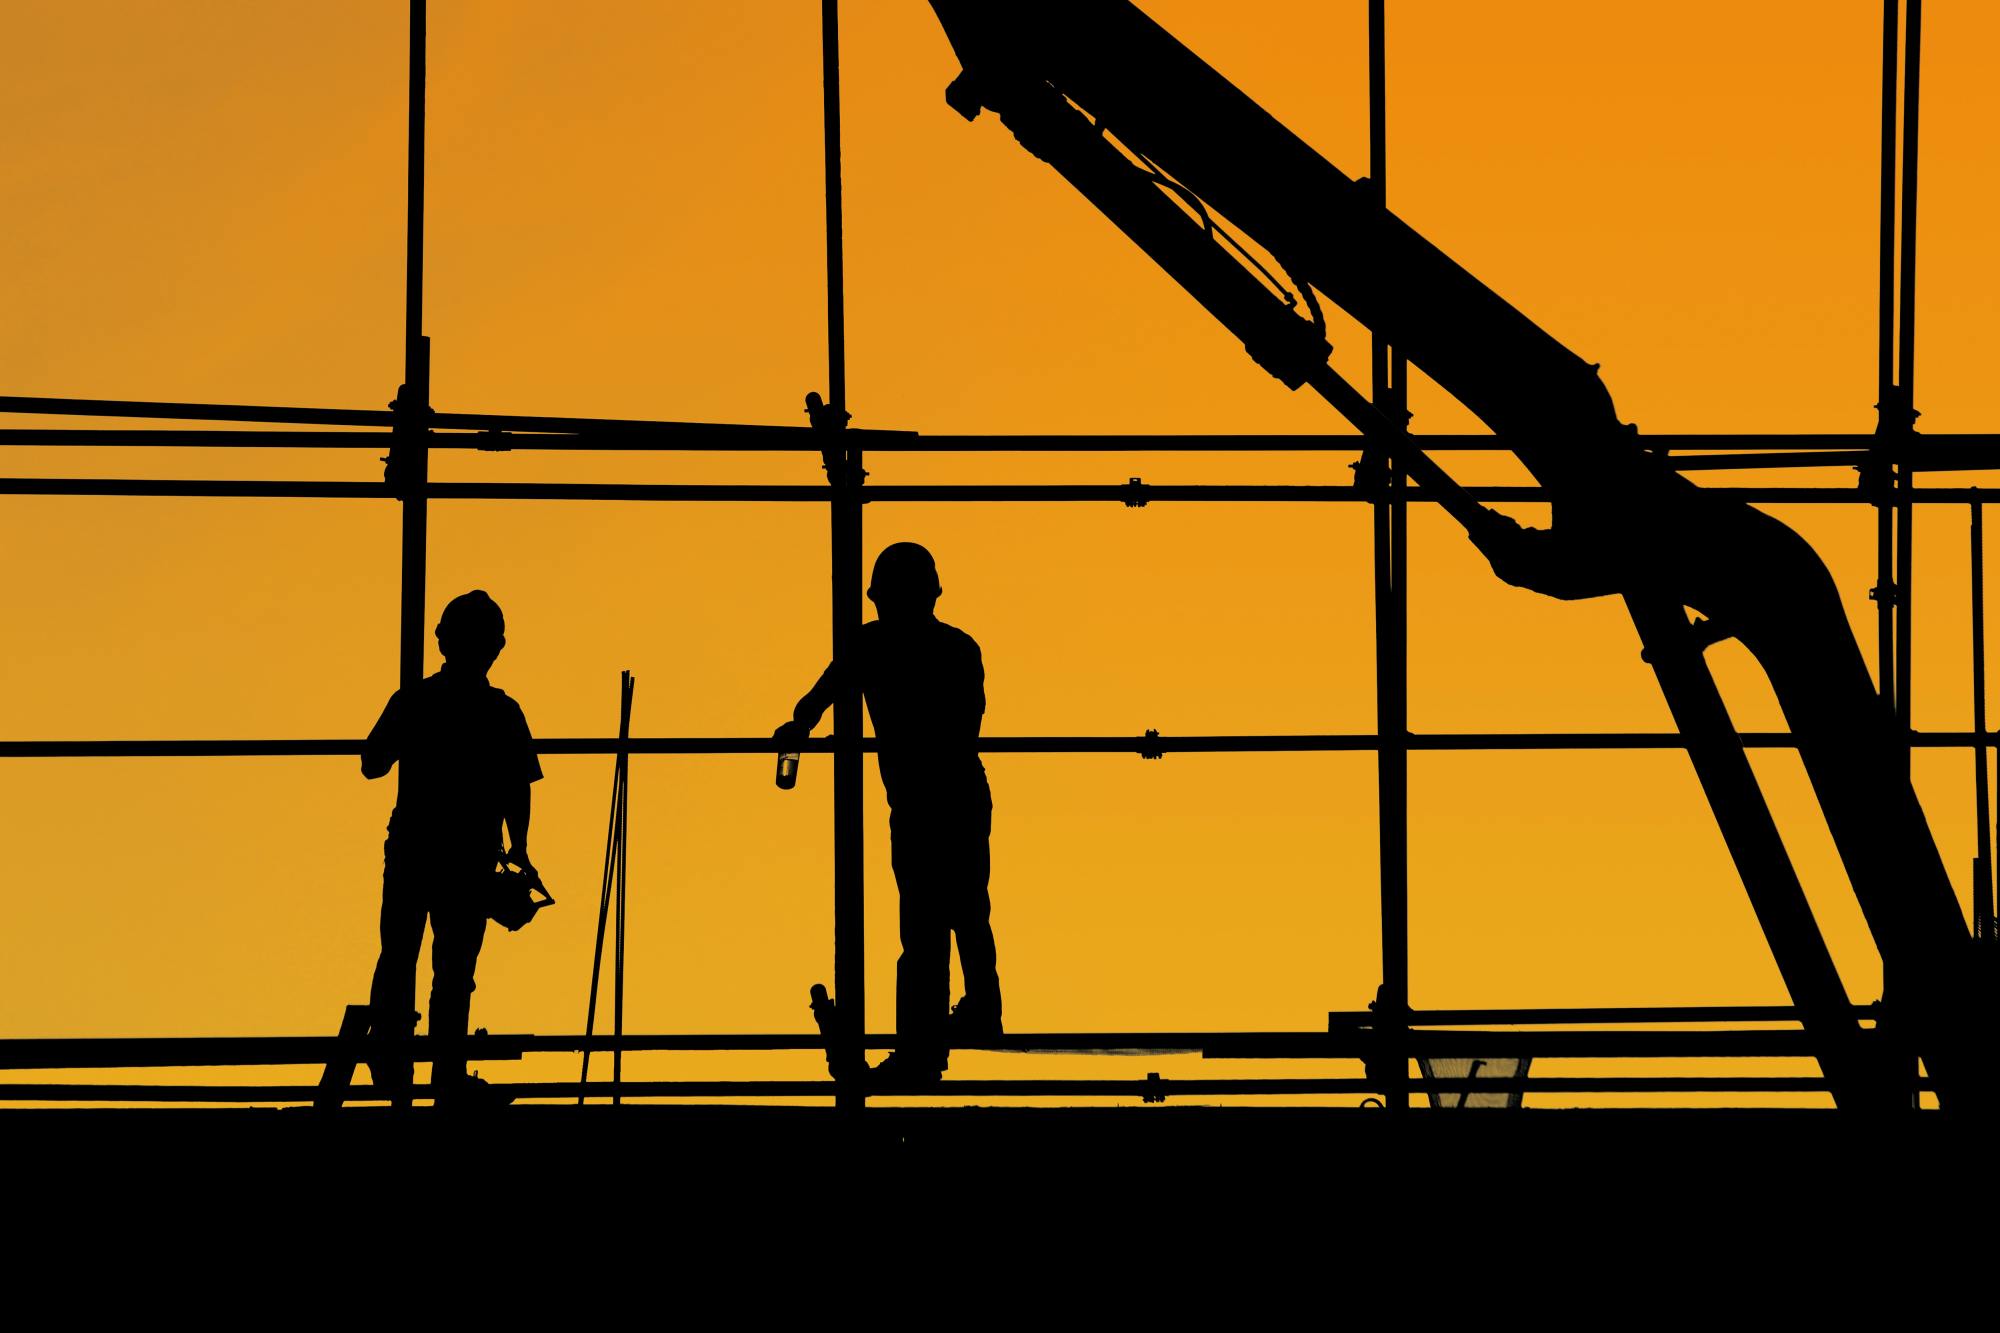 Silhouette of two builders on a building site scaffolding